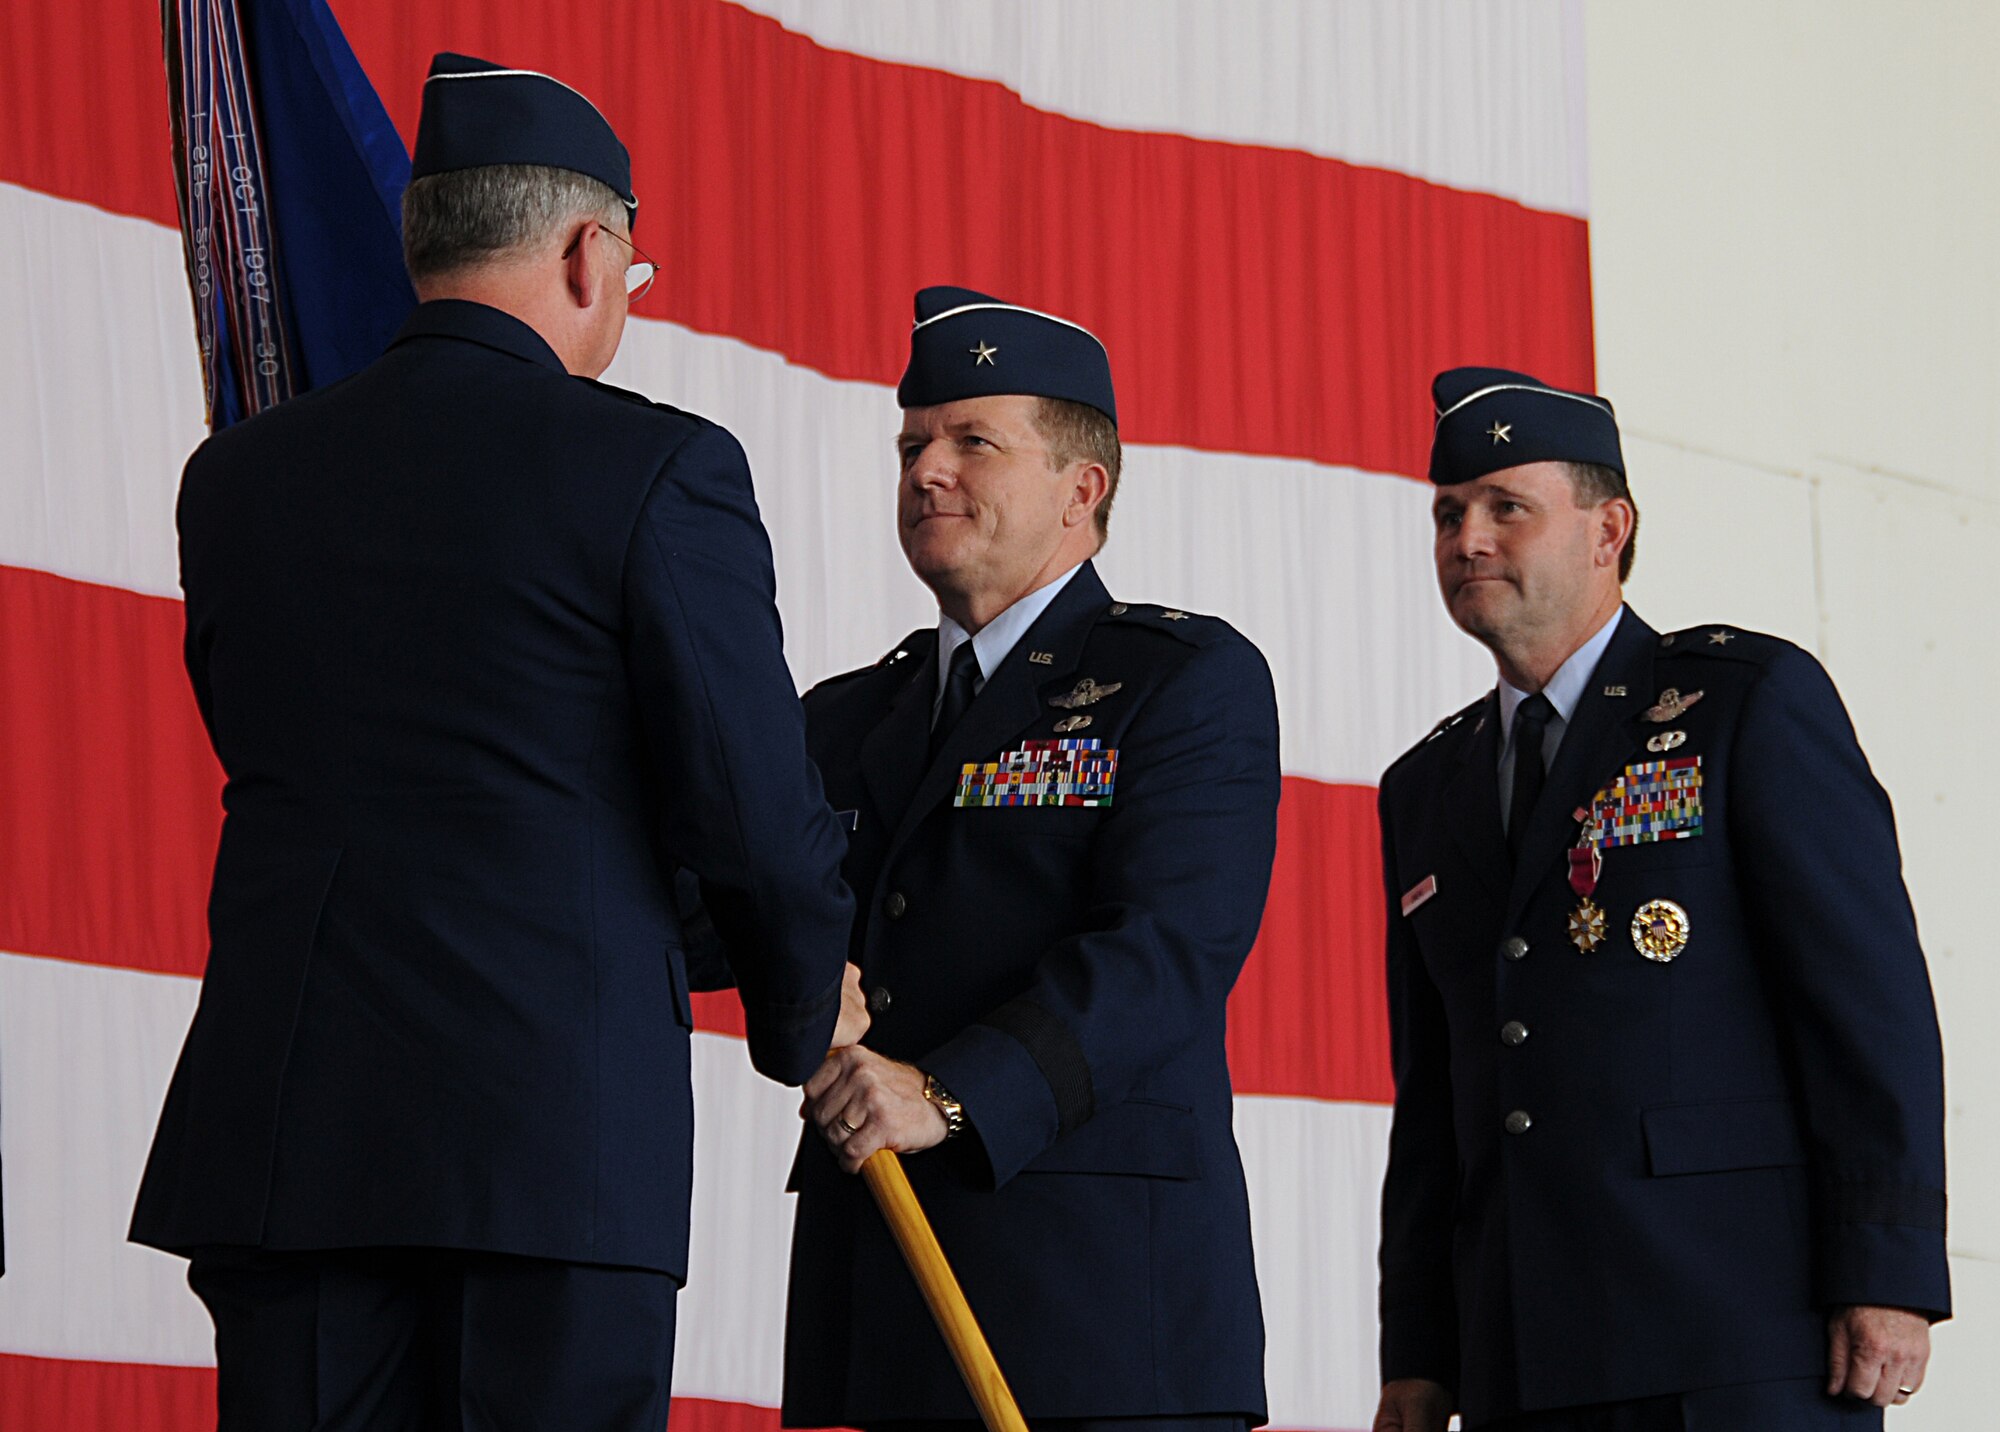 ANDERSEN AIR FORCE BASE, Guam - Lieutenant Gen. Chip Utterback, 13th Air Force commander, presents Brig. Gen. Philip Ruhlman with the 36th Wing guidon signifying the change of command Sept. 2 here. General Ruhlman arrives here from Joint Warfare, Supreme Allied Command Transformation, Stravenger, Norway where he was the Chief of Staff.  (U.S. Air Force by Staff Sergeant Jamie Lessard)